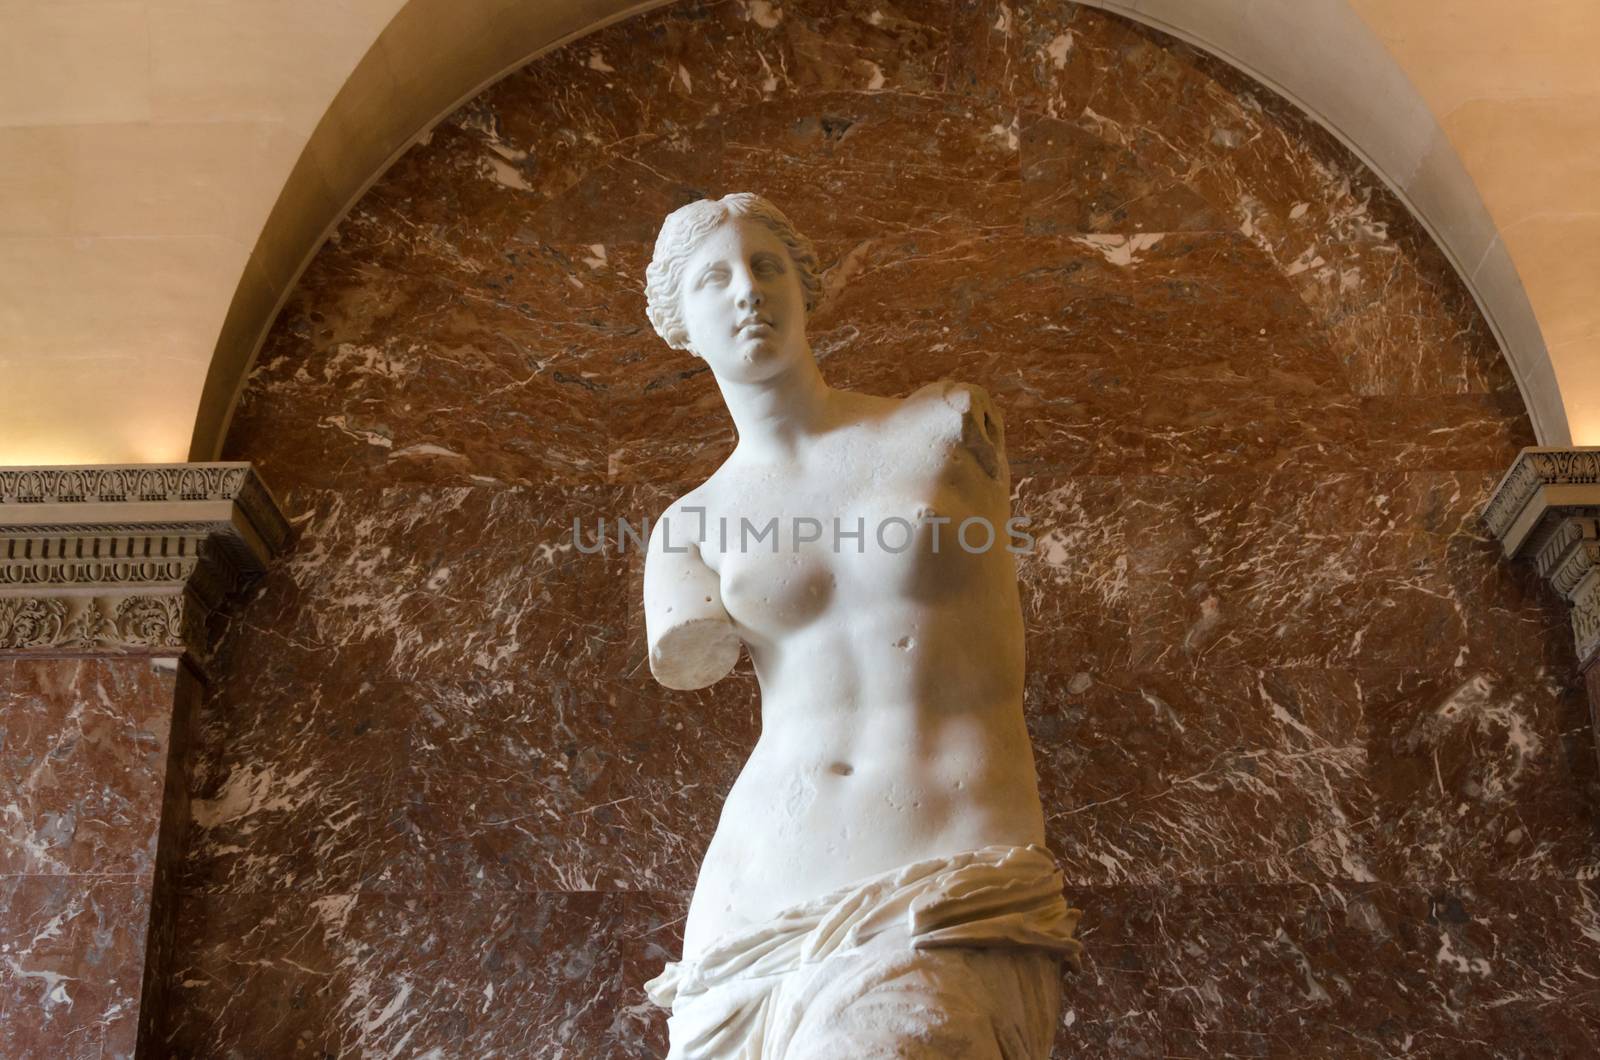 Paris, France - May 13, 2015: The Venus de Milo statue at the Louvre Museum by siraanamwong